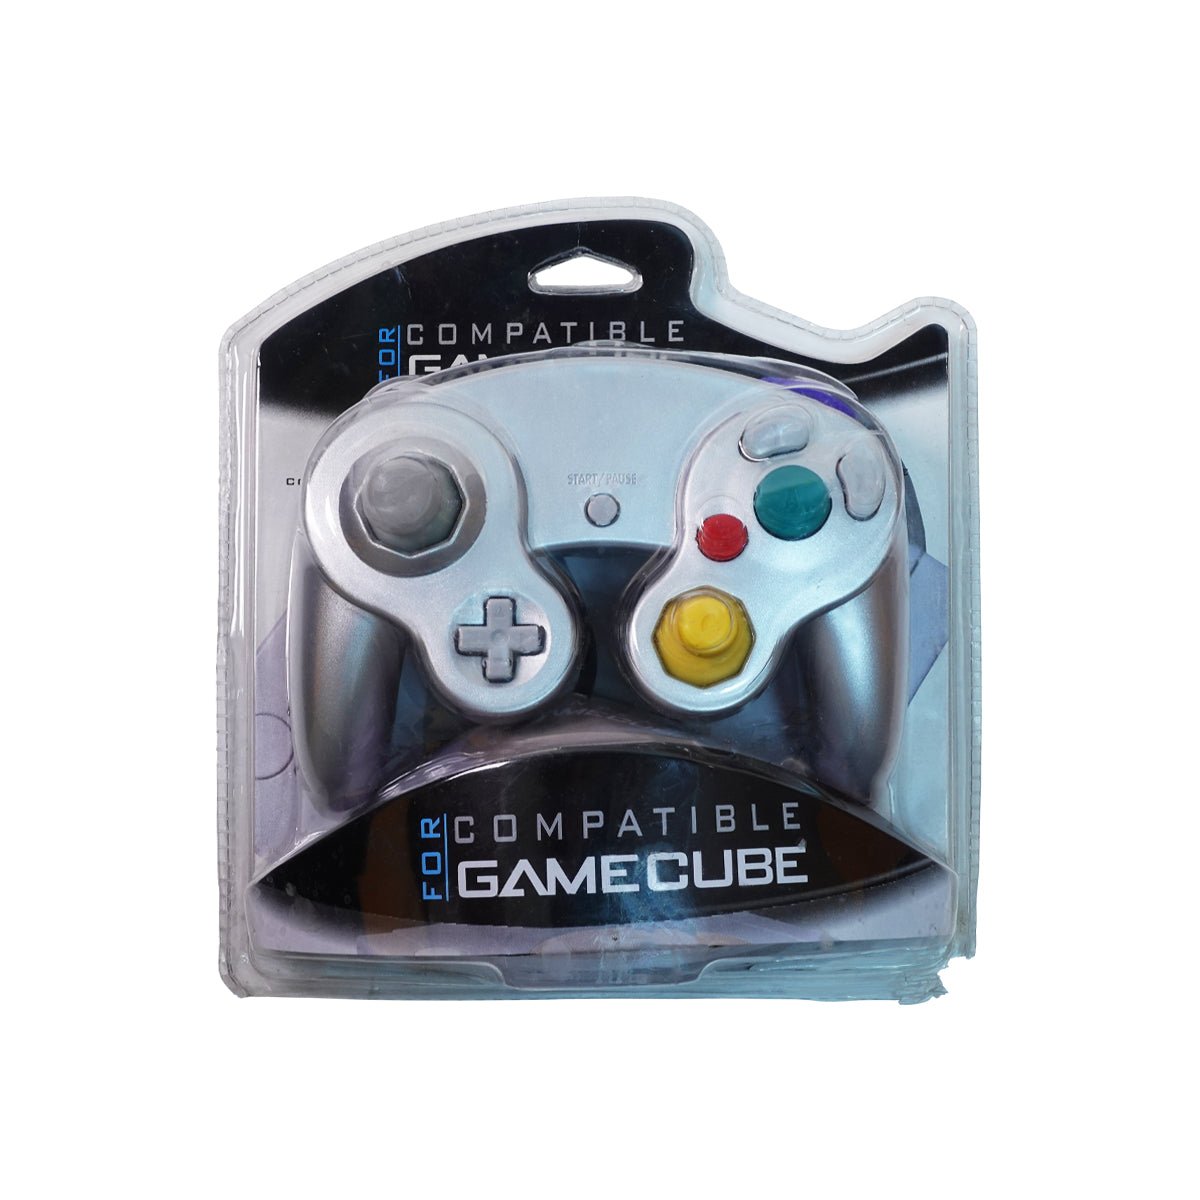 (Pre-Owned) Nintendo GameCube Wired Controller with Box - Grey - Store 974 | ستور ٩٧٤